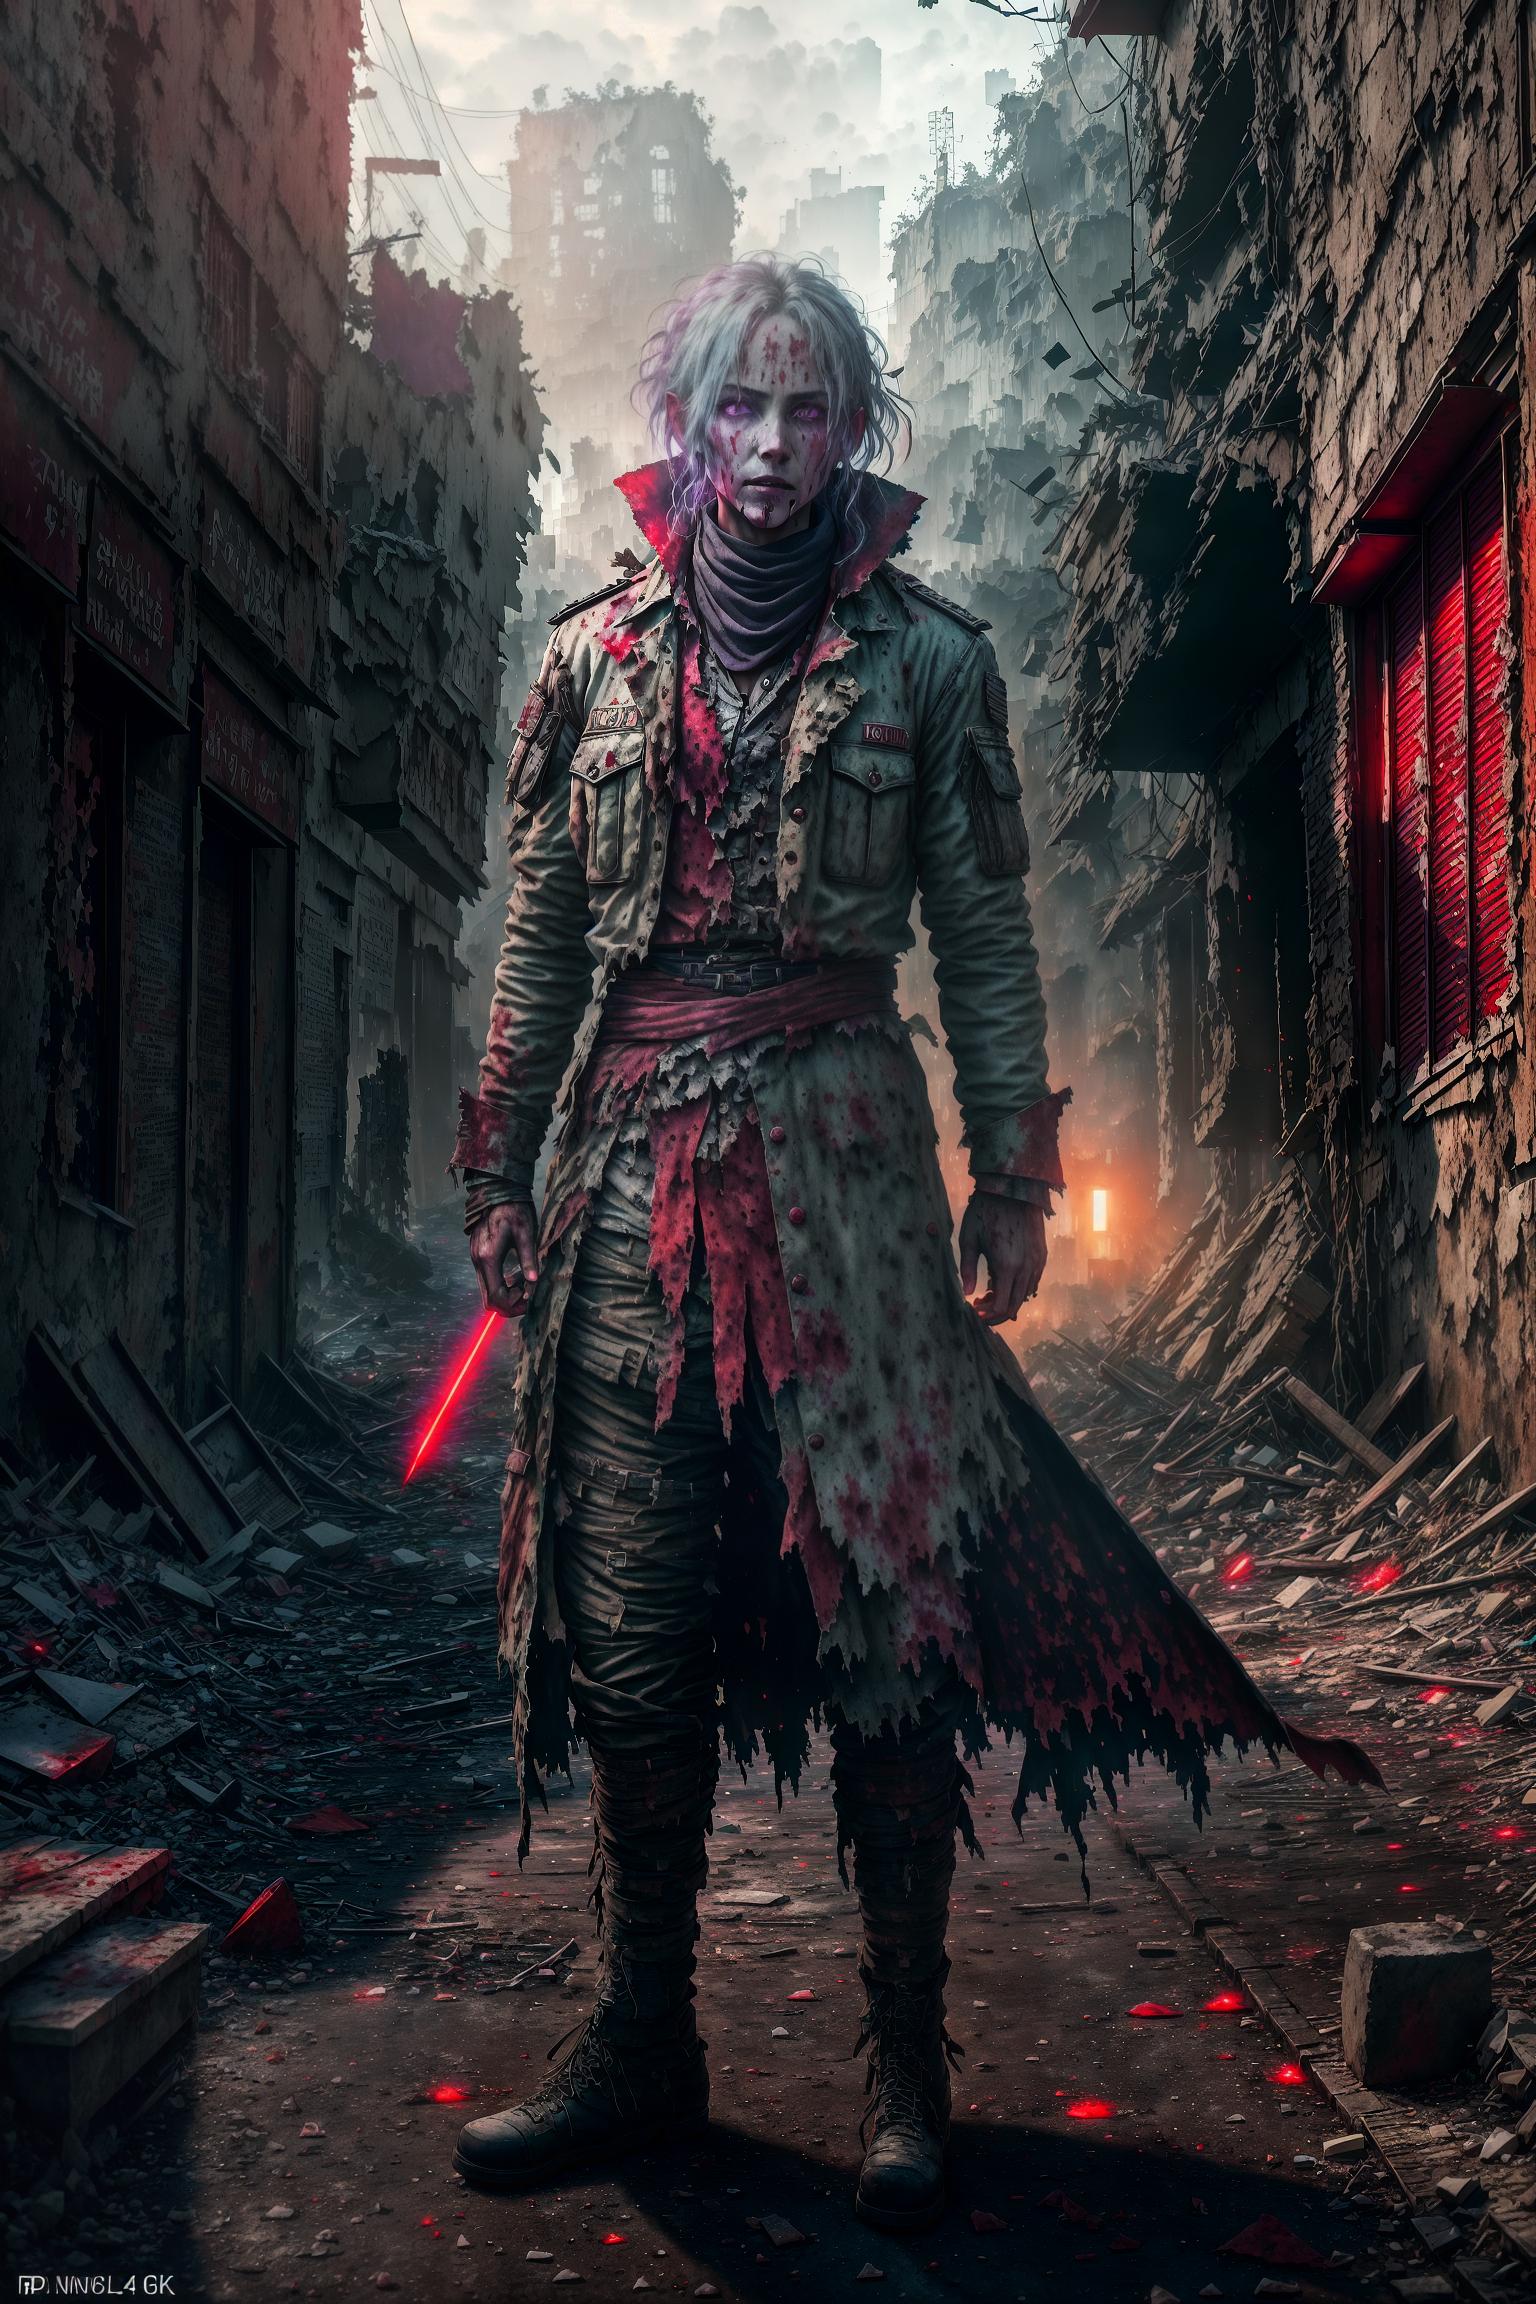  Zombie, (rotten skin:1.2), (as a zombie), (their skin should be decayed and unhealthy), (color may be gray or dark purple), (tattered clothing:1.0), (wearing old and stained clothes), (clothes can be randomly selected from various professions and life scenes), (such as doctors, police officers, chefs, etc.), (lifeless gaze:1.0), (zombie's eyes are usually empty or have malicious red glow), (bloodstains and wounds:1.0), (obvious bite marks or torn wounds on the body), (surrounded by dried or fresh bloodstains), (ruins environment:1.2), (main scene should be in the urban ruins left after destruction), (surrounded by collapsed buildings, broken vehicles, etc.), (to show that human civilization has fallen), (army gathering:1.0), (displaying a l hyperrealistic, full body, detailed clothing, highly detailed, cinematic lighting, stunningly beautiful, intricate, sharp focus, f/1. 8, 85mm, (centered image composition), (professionally color graded), ((bright soft diffused light)), volumetric fog, trending on instagram, trending on tumblr, HDR 4K, 8K